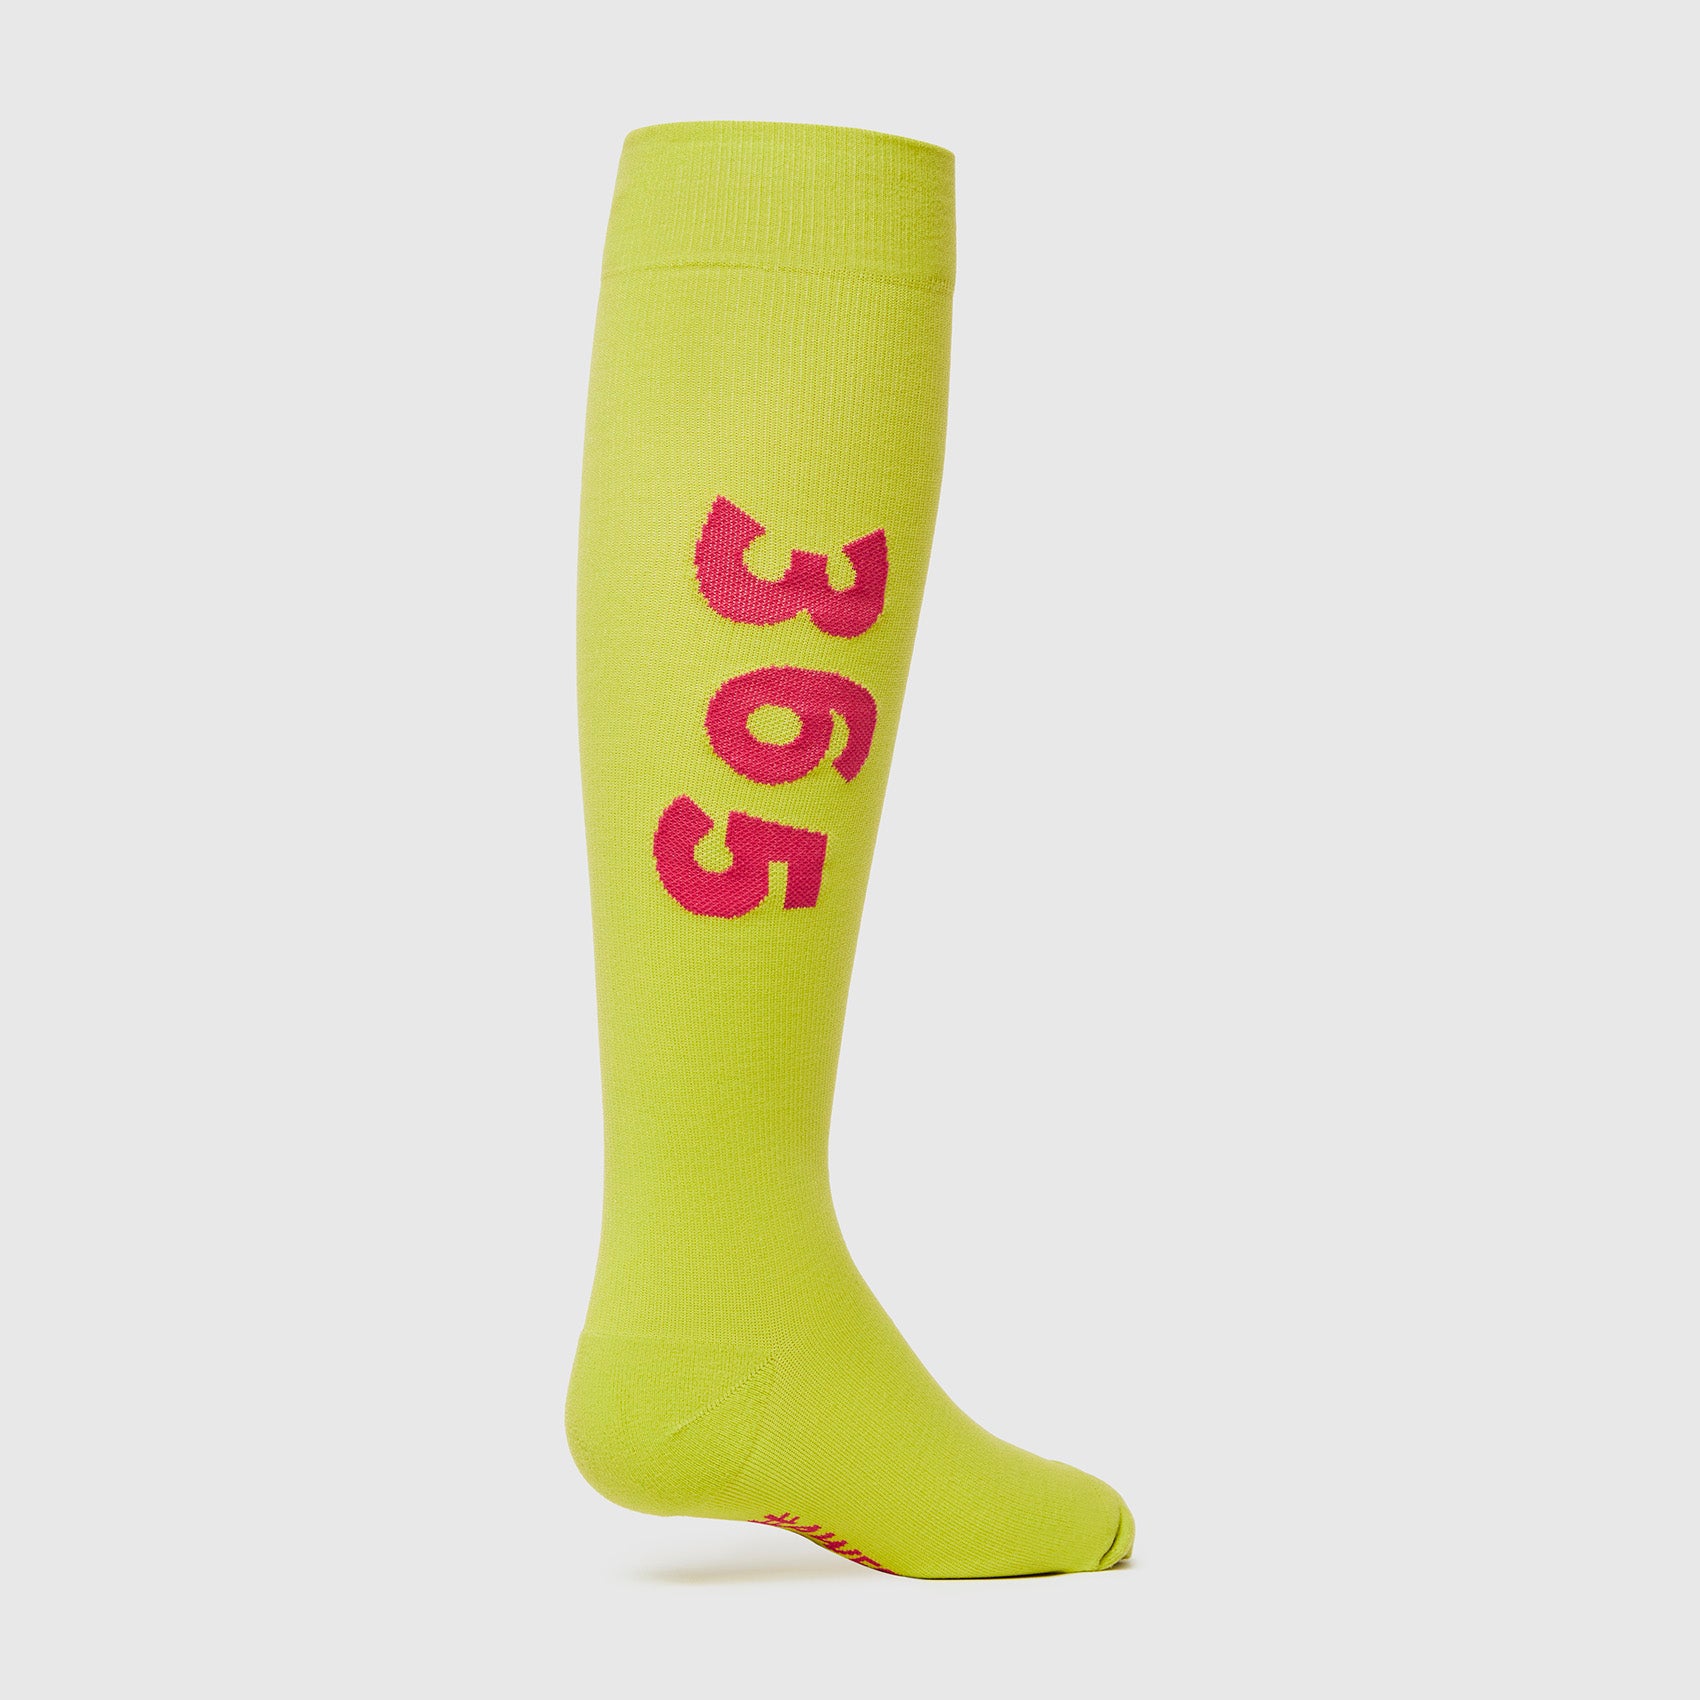 https://cdn.shopify.com/s/files/1/0139/8942/products/Q1_2023_02_LIMEADE_AWESOME-NURSE-COMPRESSION-SOCK_W_GHOST_31563.jpg?v=1682351213